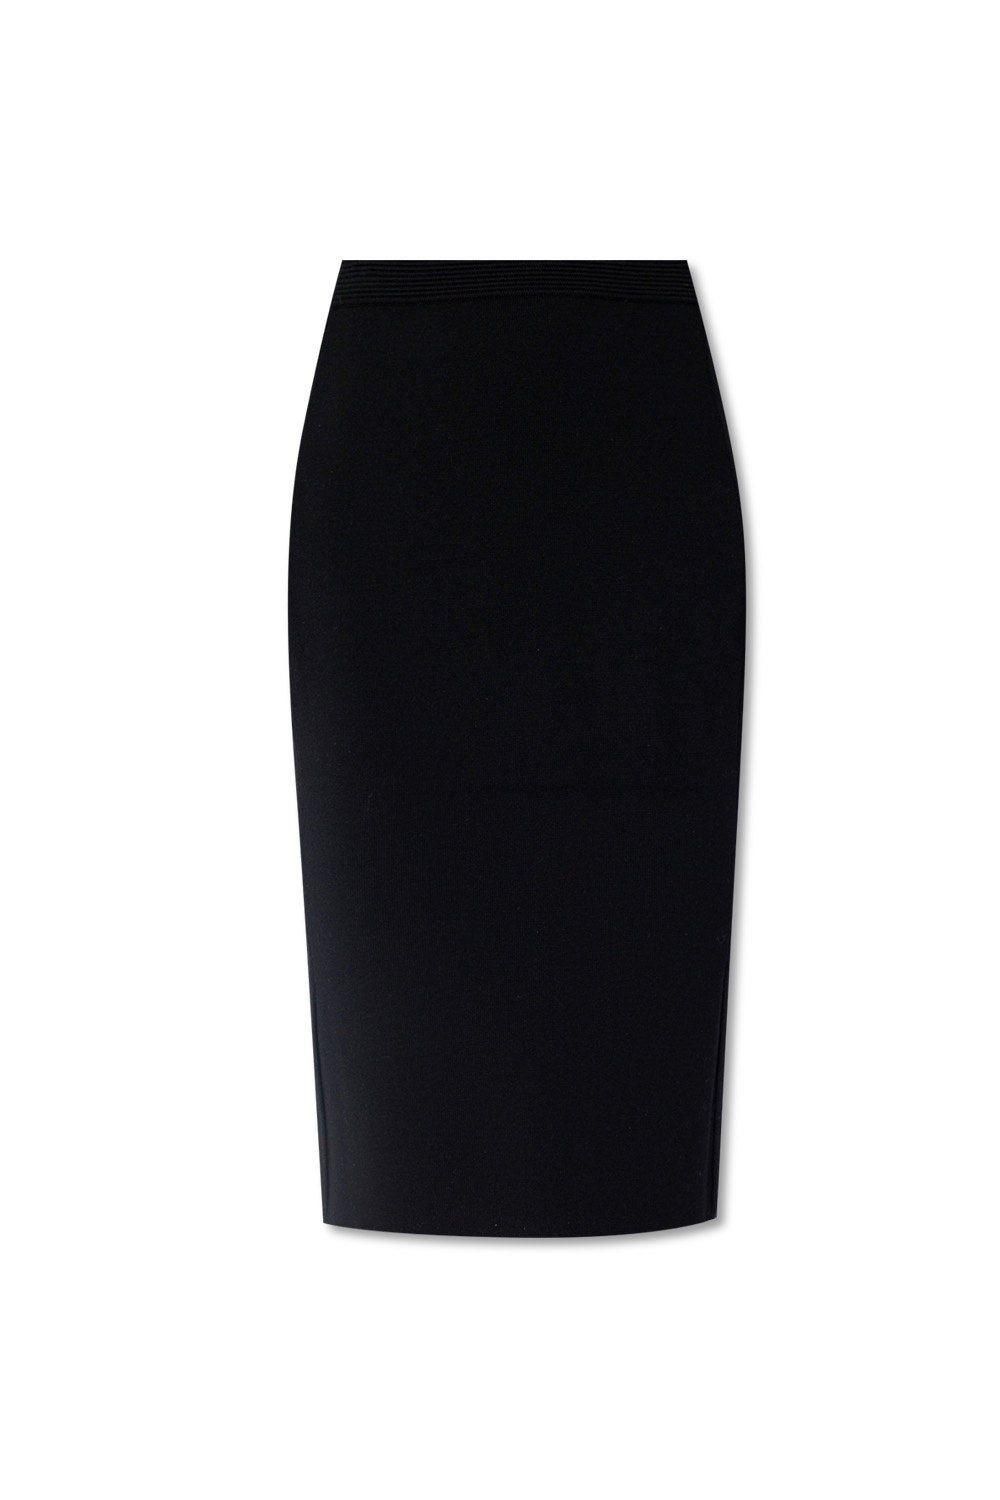 Baby shoes 13-24 Pencil skirt